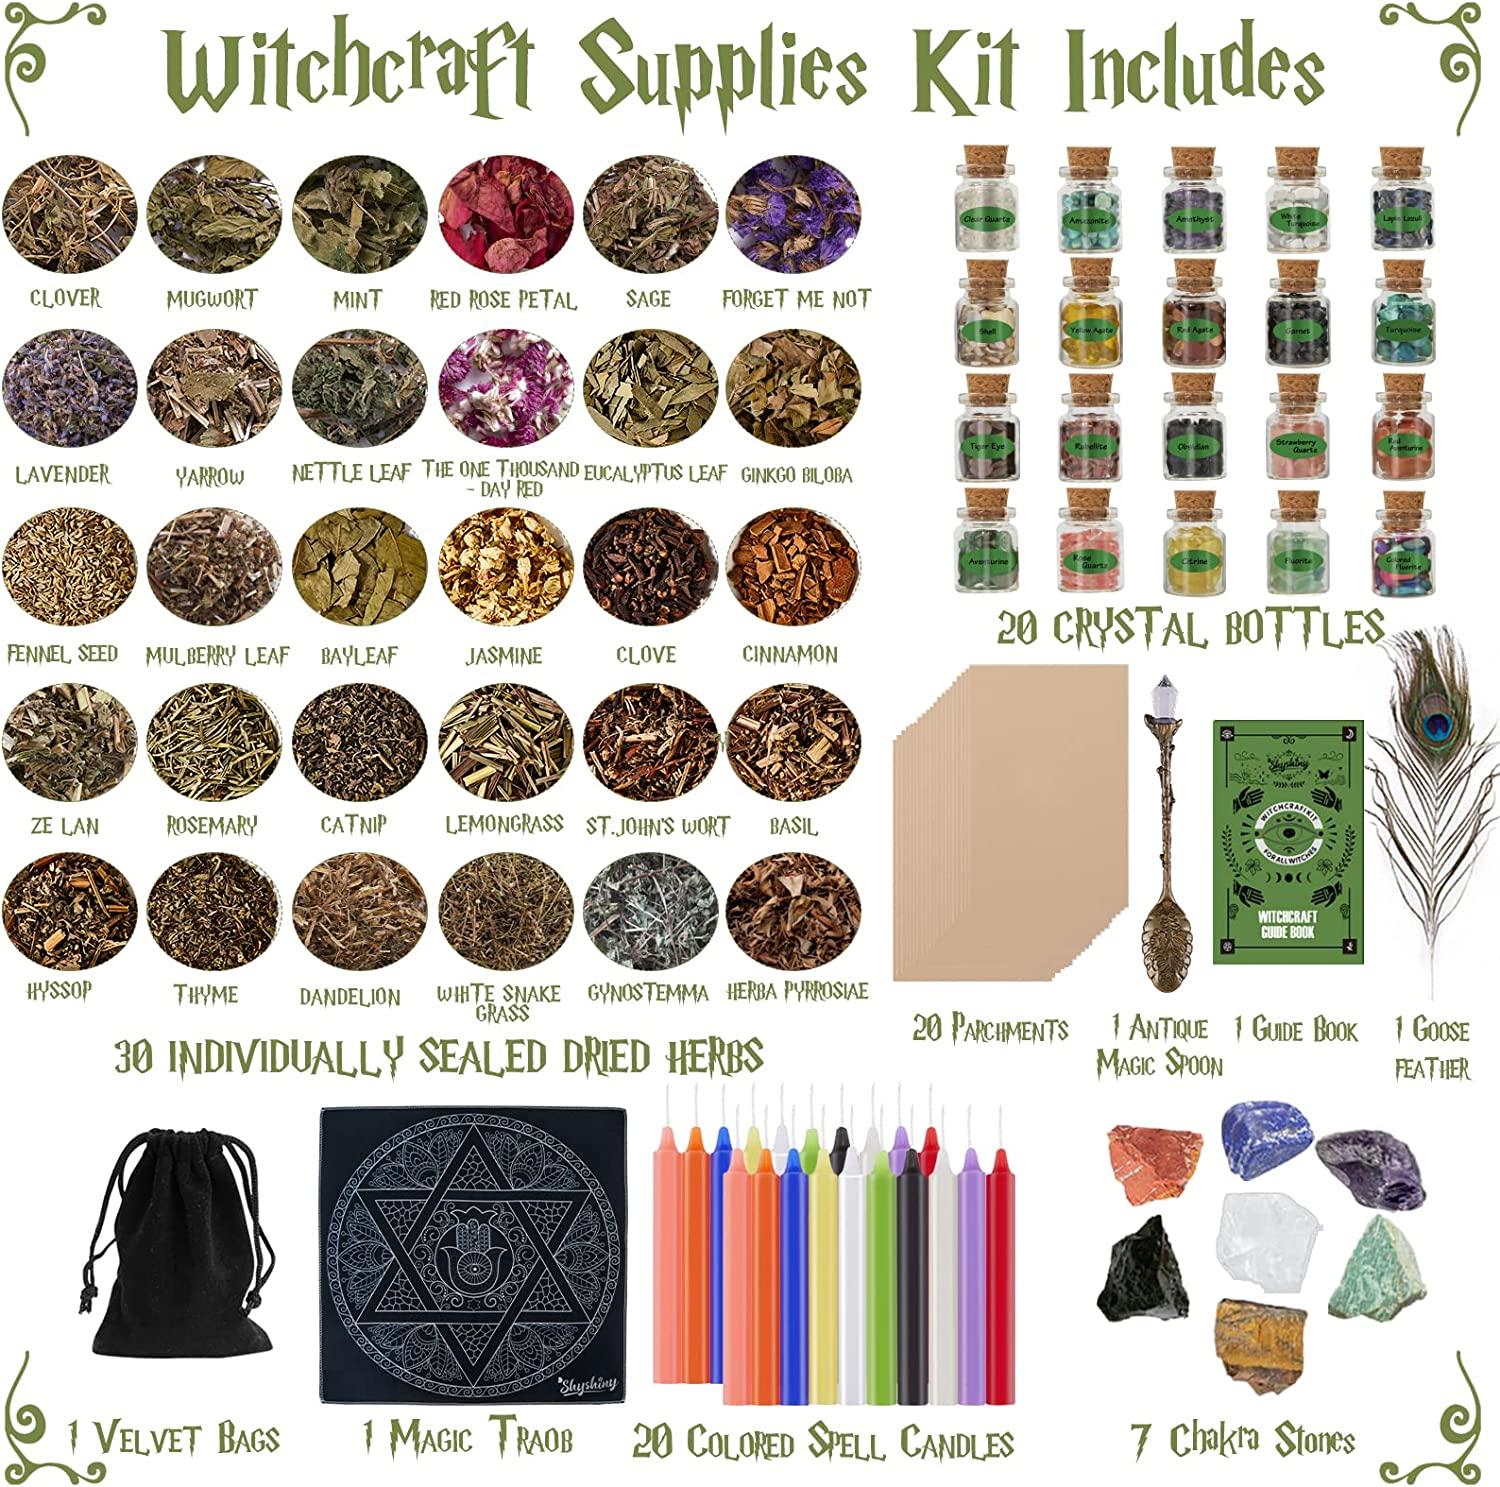  Witchcraft Supplies Witch Stuff Herbs Kit for Spell